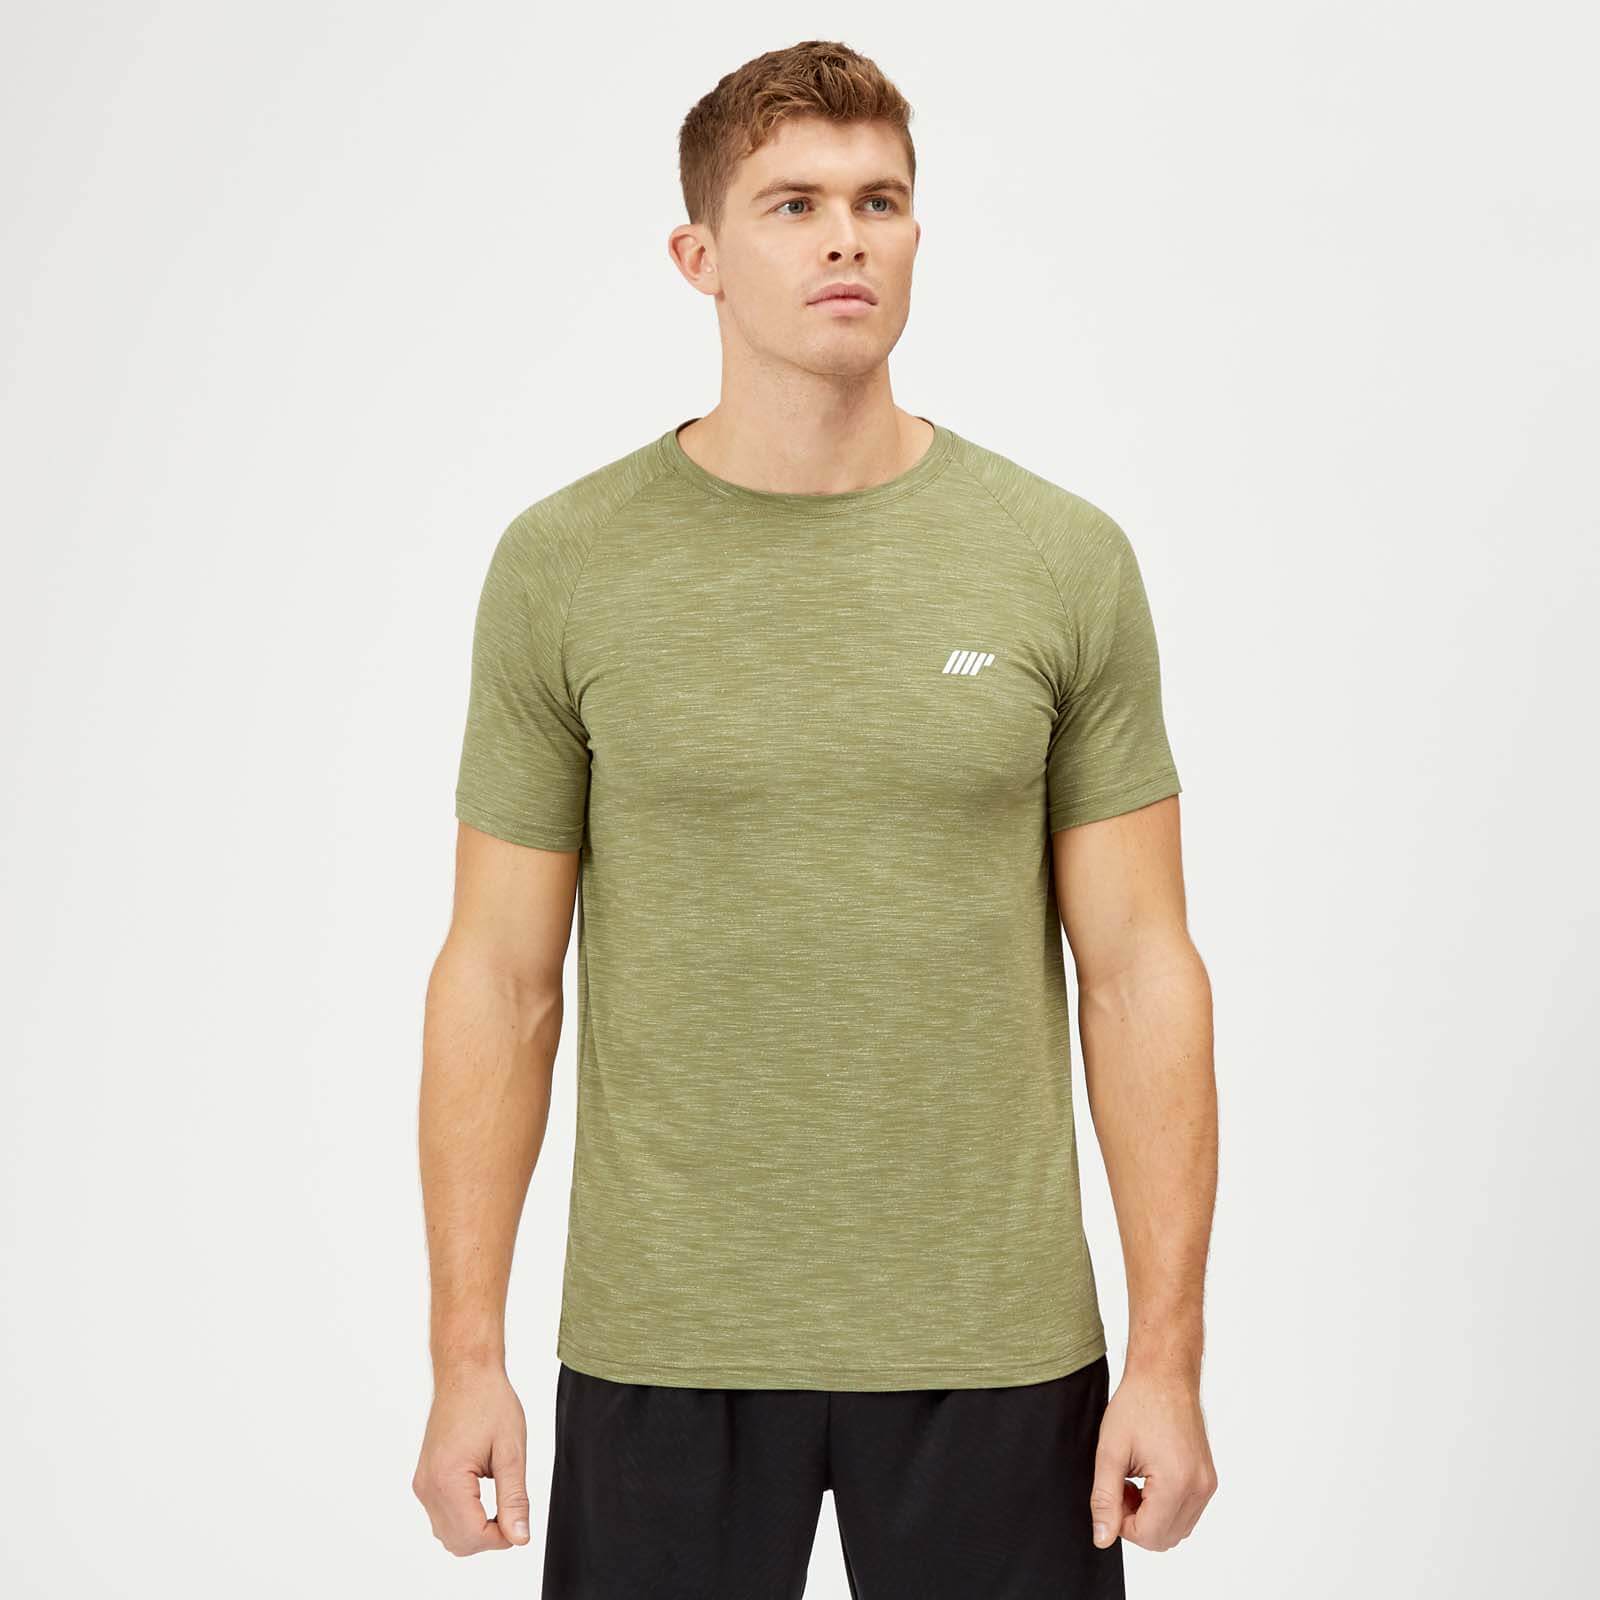 Limited Edition Performance T-Shirt - Light Olive - XS